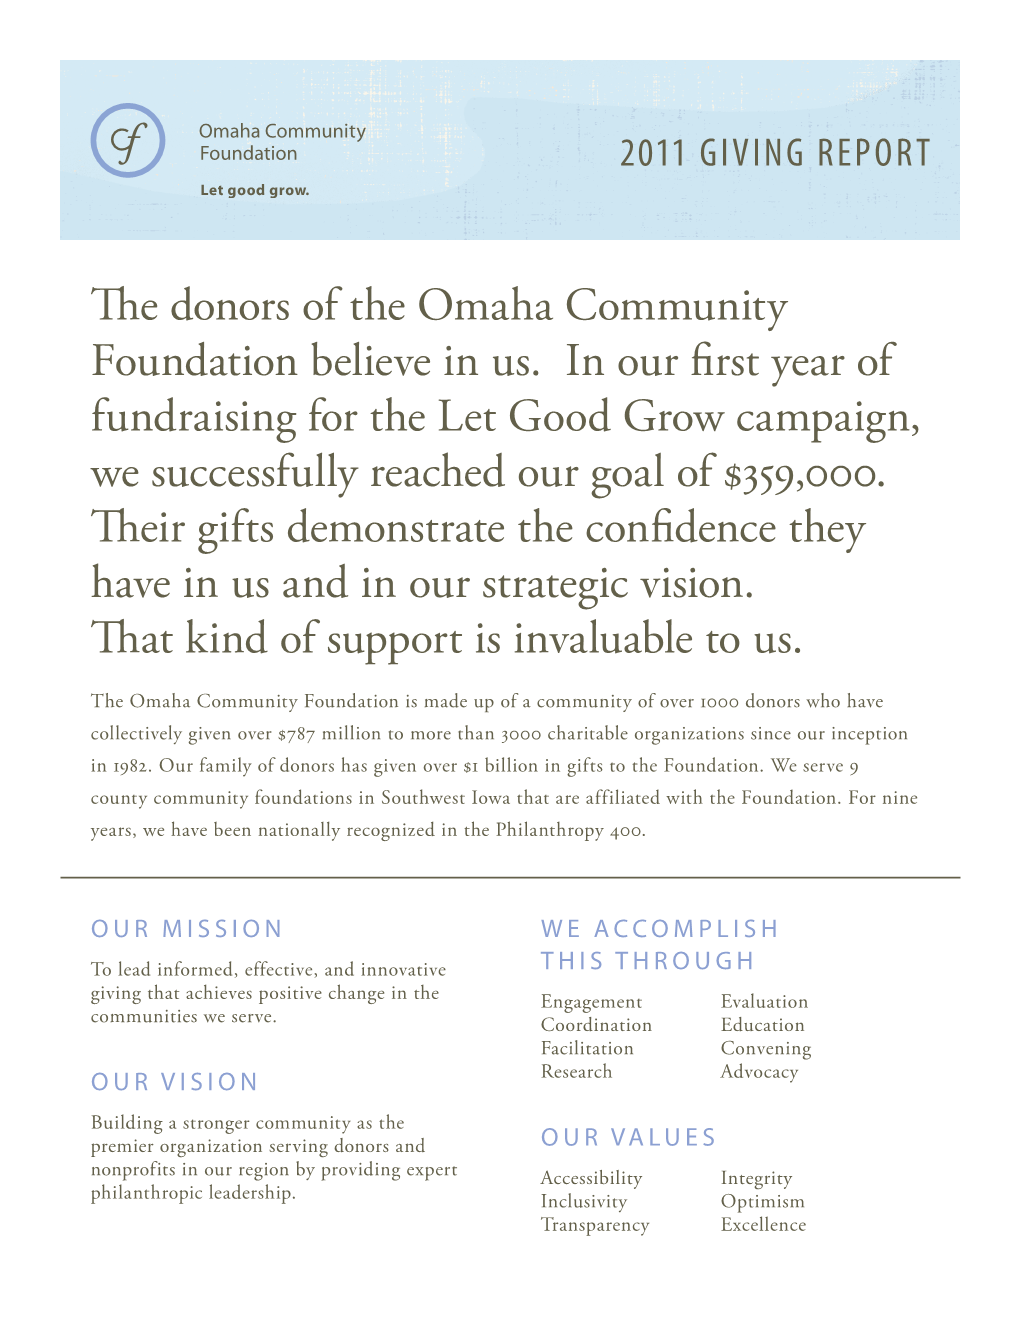 The Donors of the Omaha Community Foundation Believe in Us. in Our First